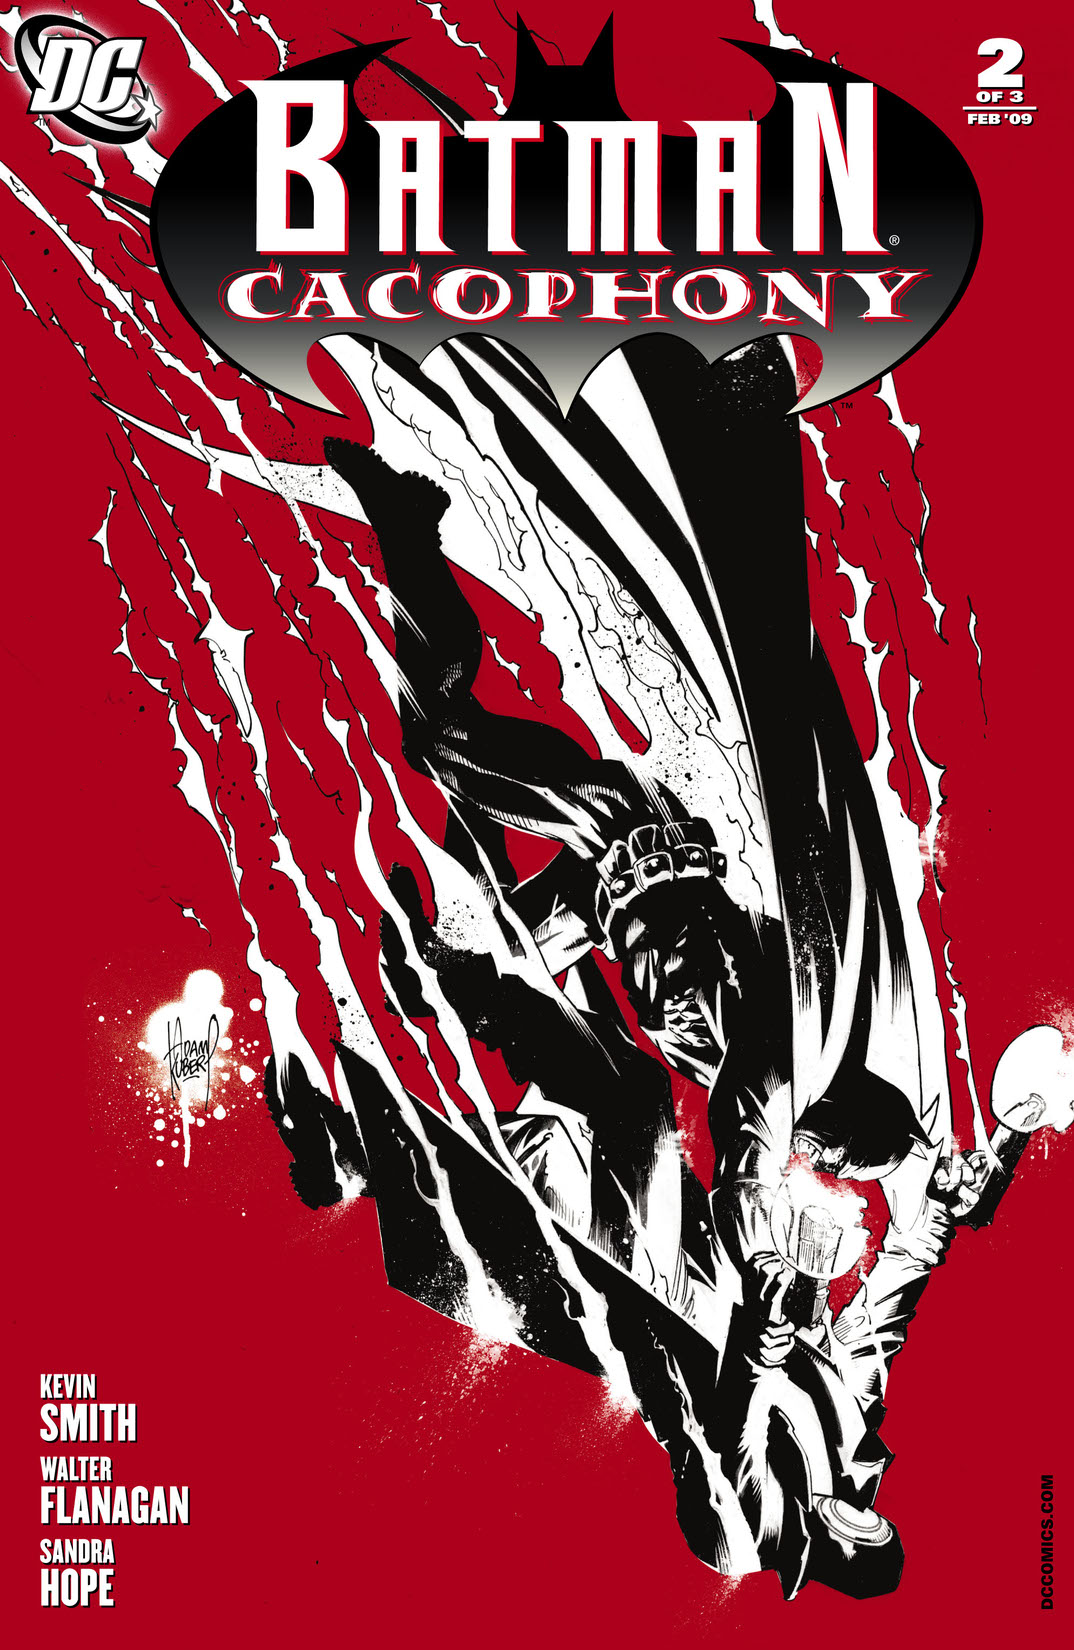 Batman: Cacophony #2 preview images